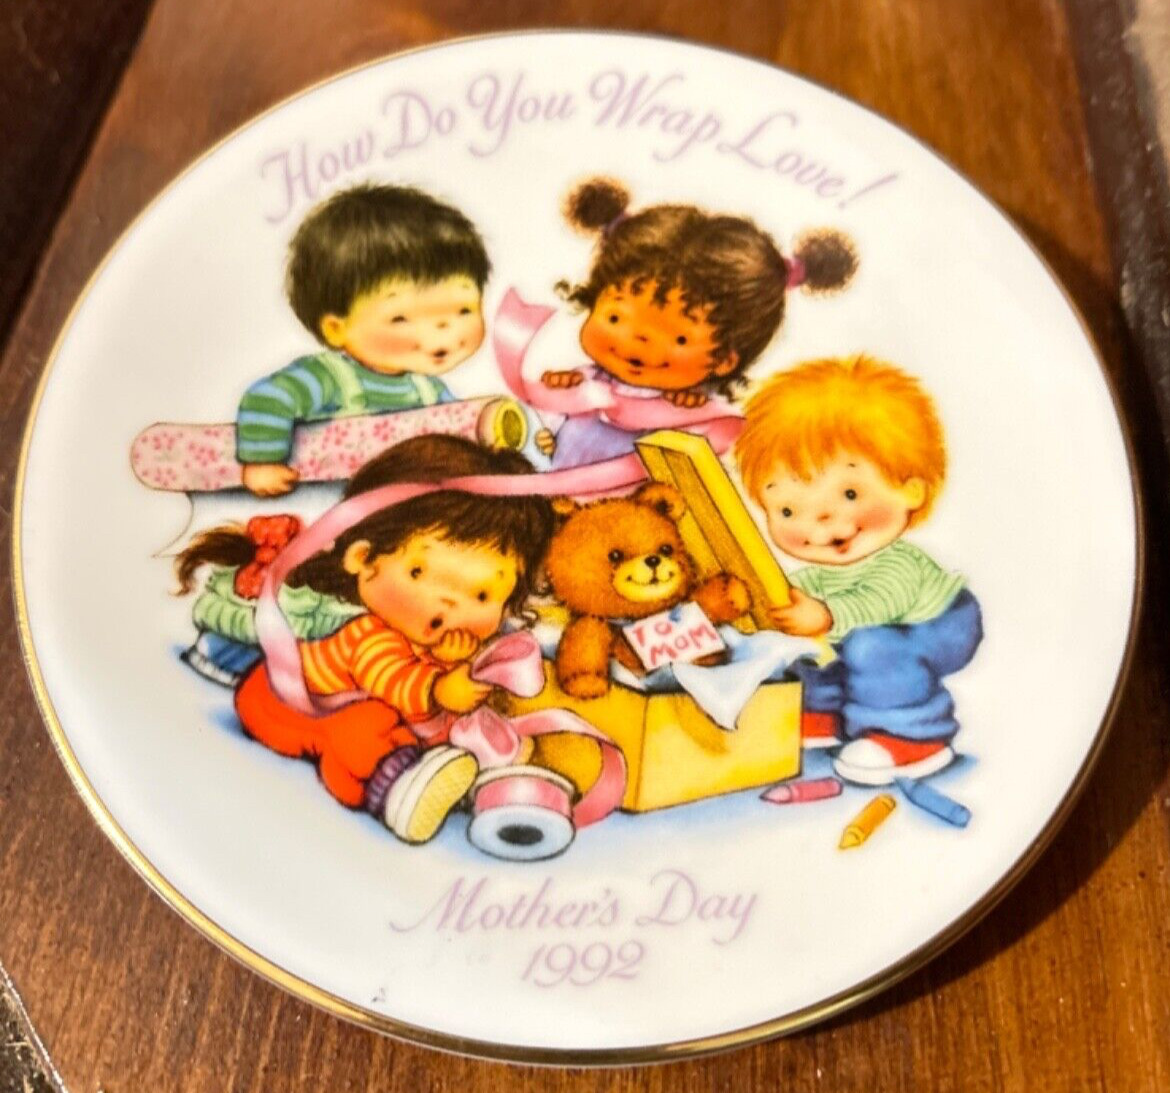 Vintage 1992 AVON MOTHERS DAY COLLECTOR PLATE How Do You Wrap Love? 22K